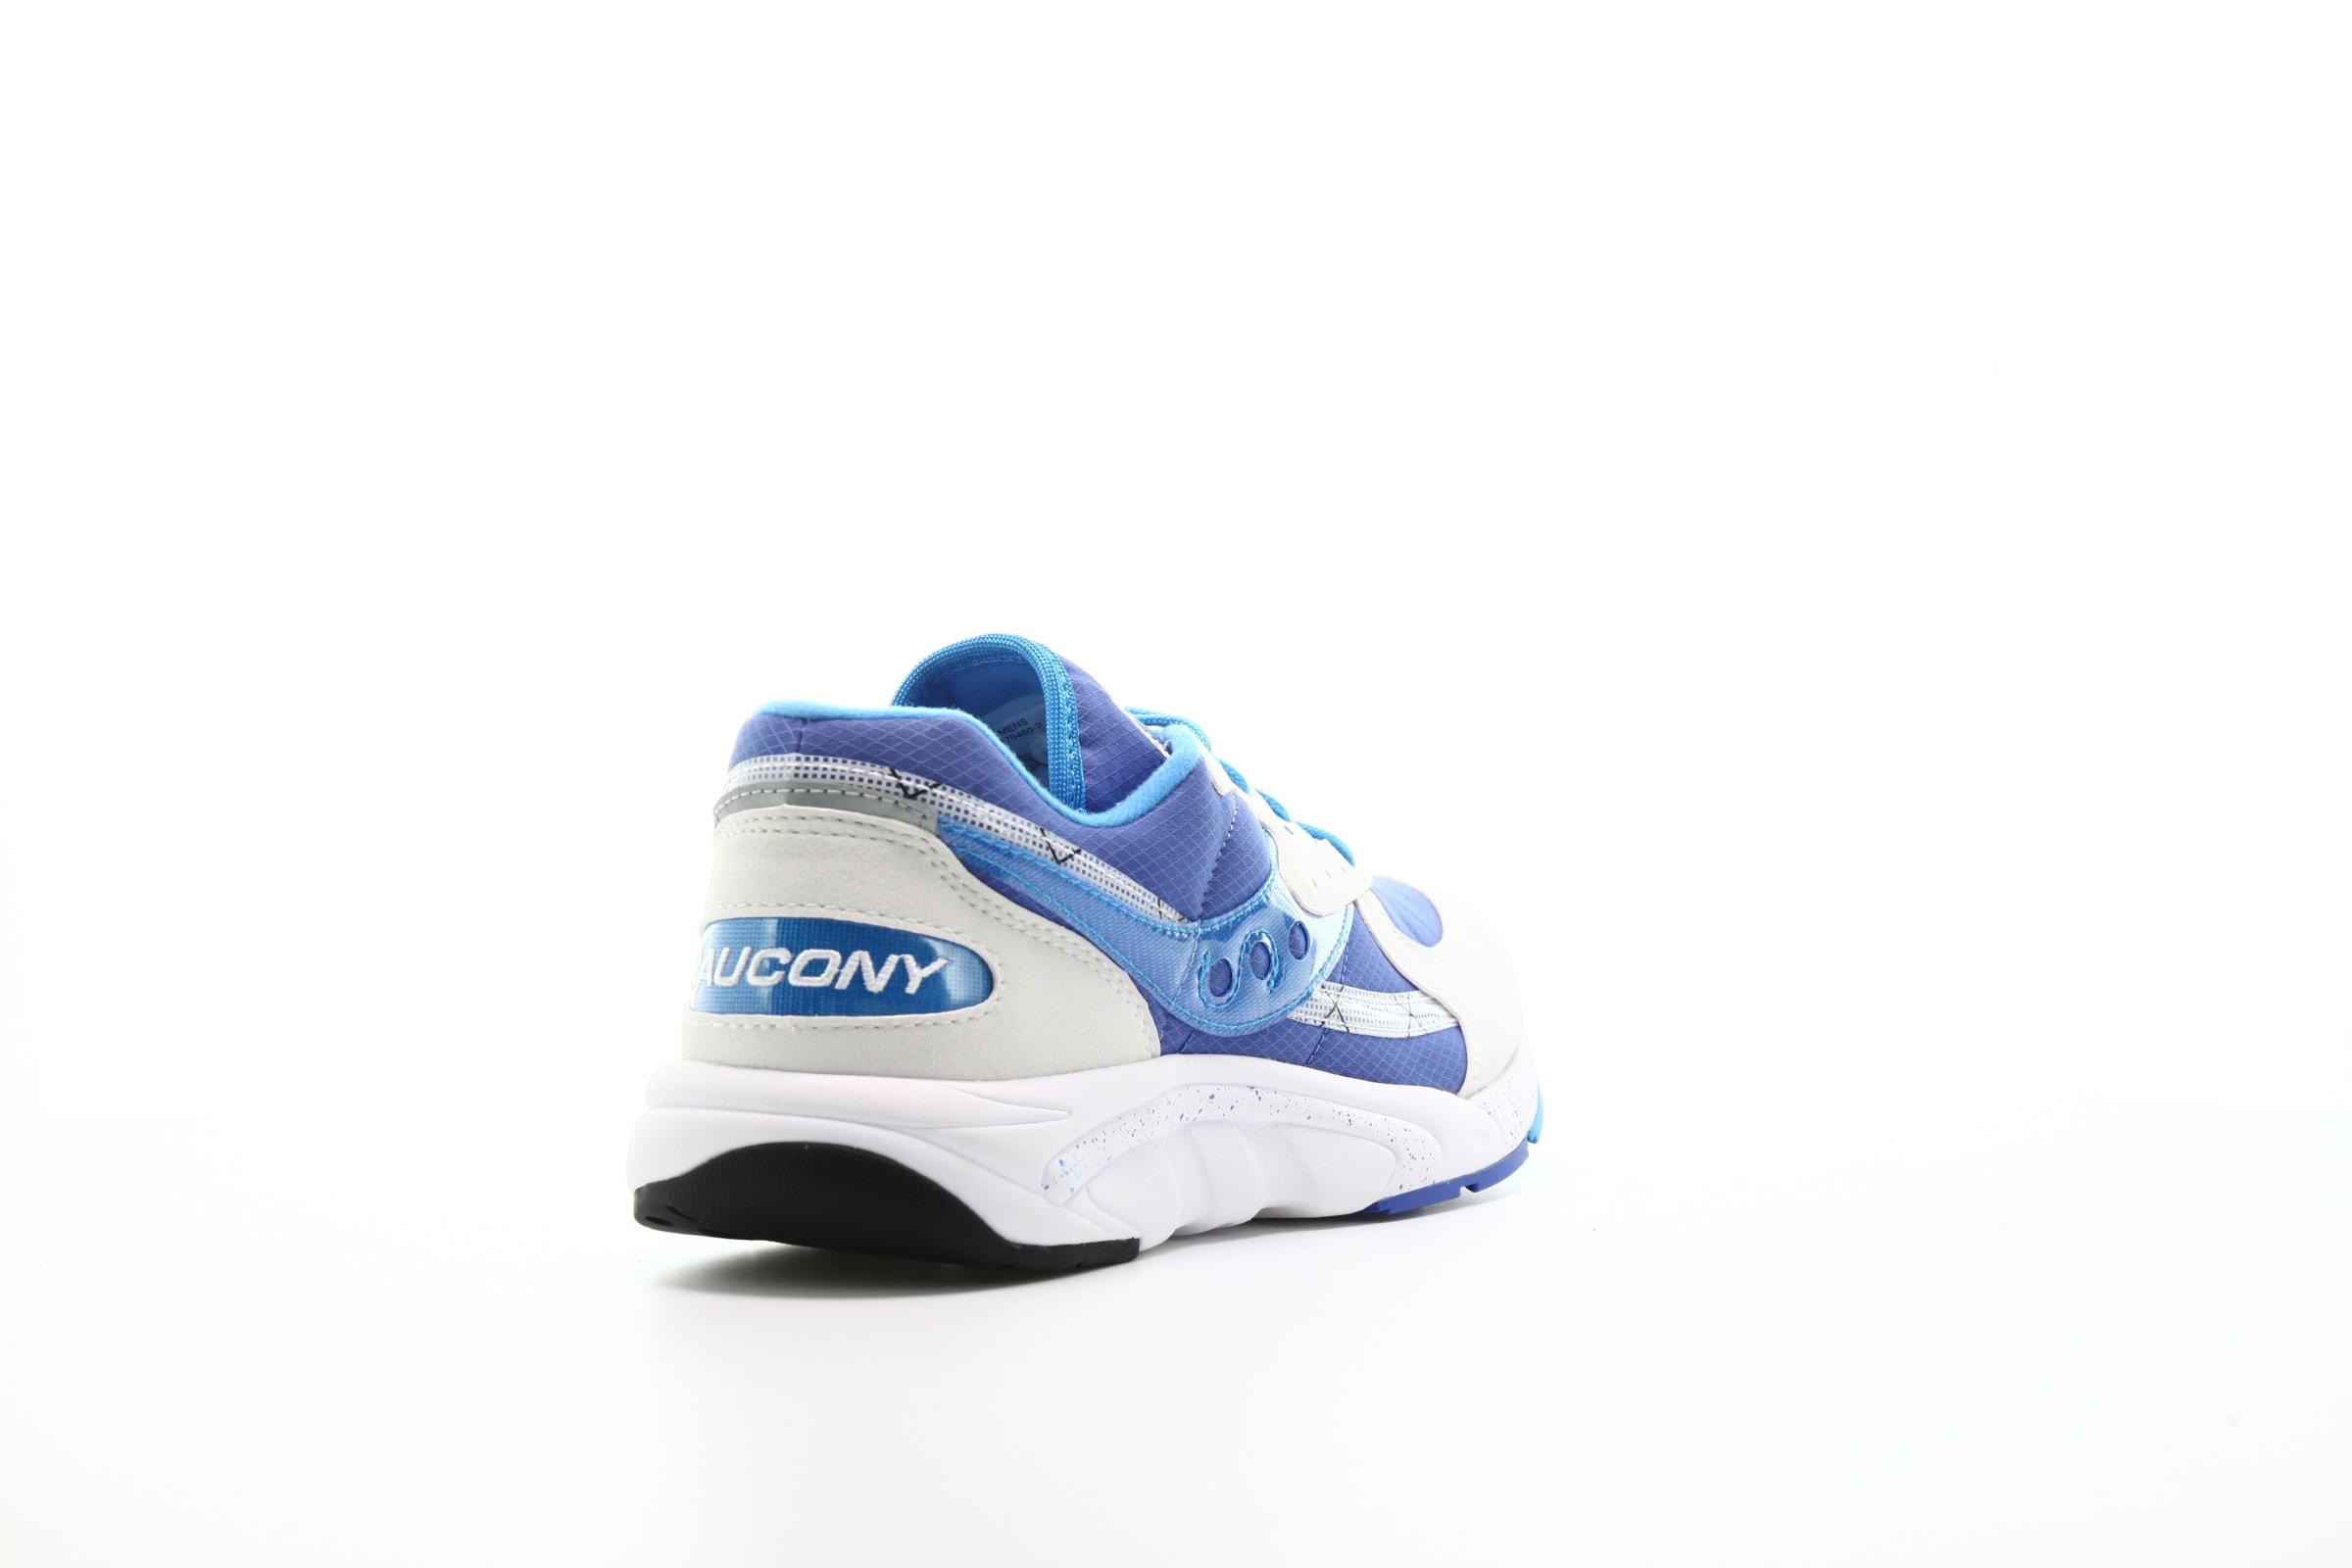 Saucony Aya "White And Blue"